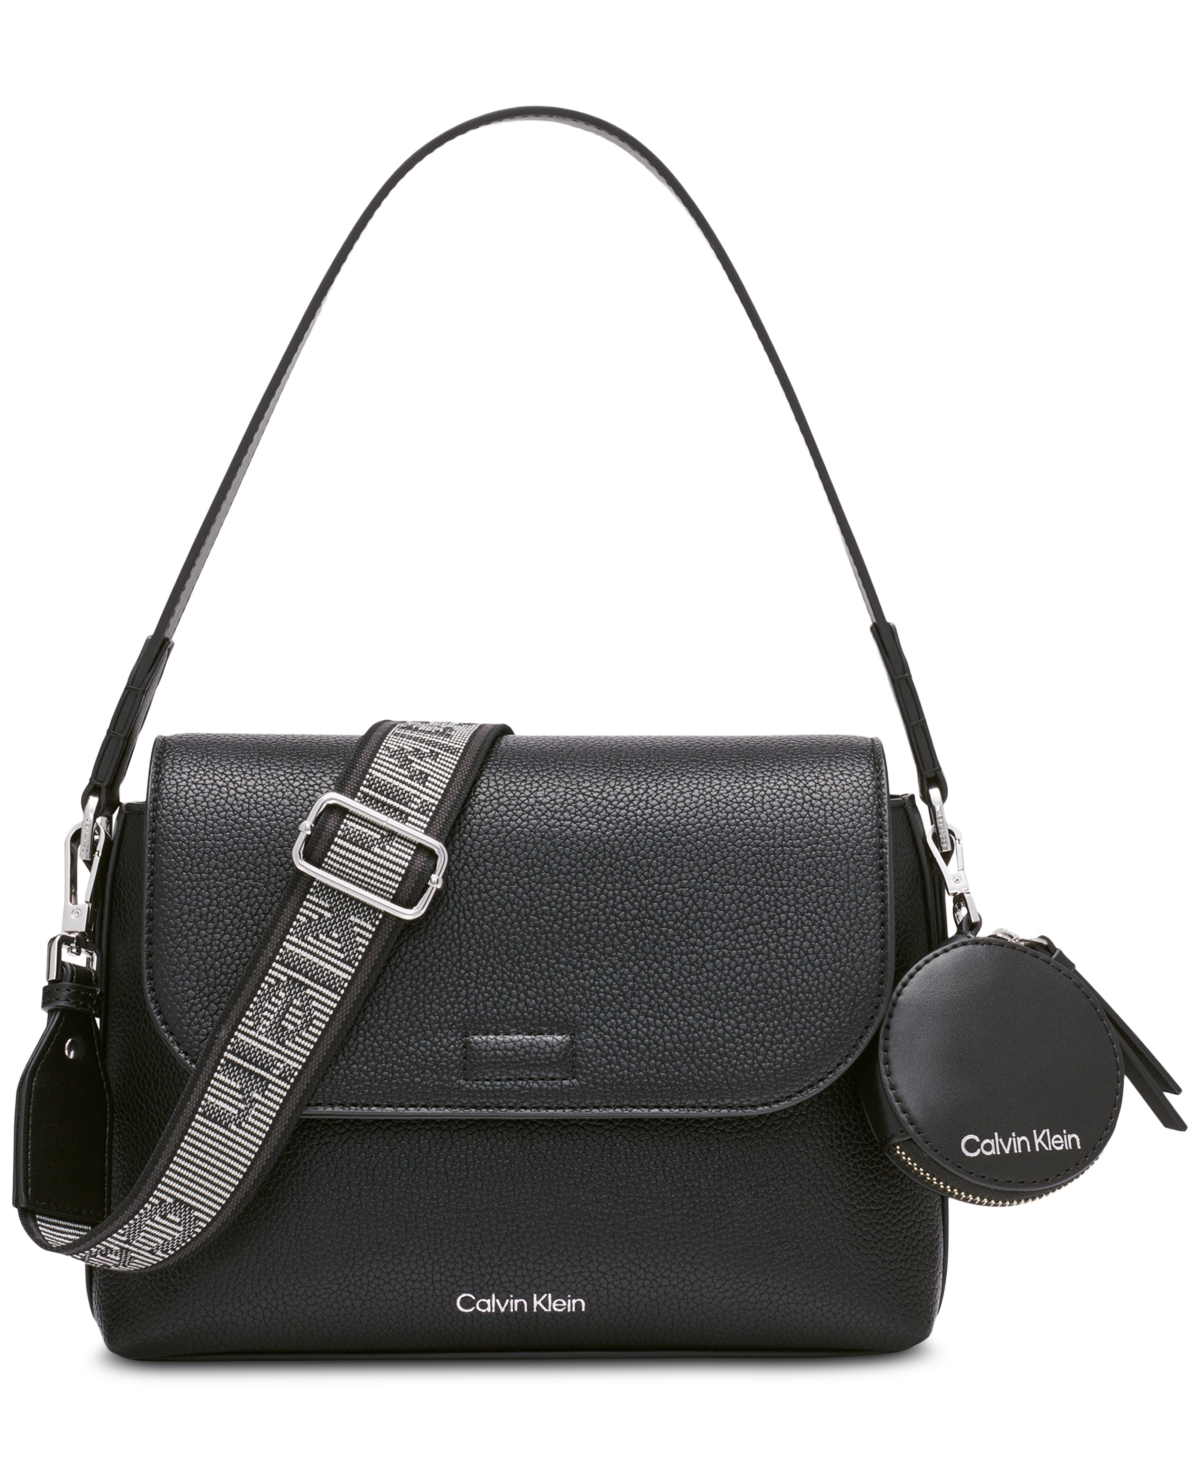 Calvin Klein Millie Small Convertible Shoulder Bag With Striped Crossbody Strap In Black,silver